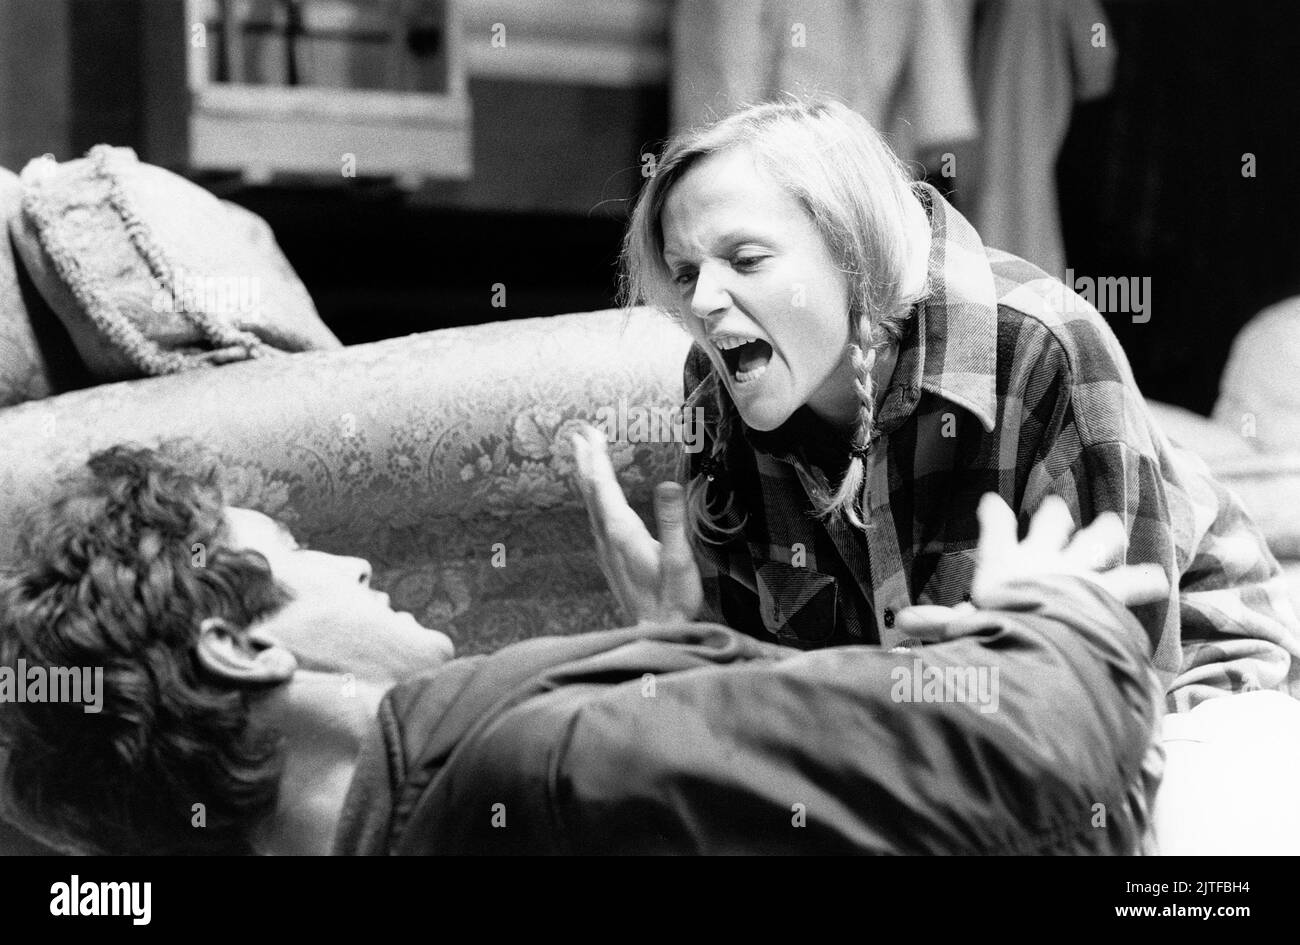 Paul McGann (Frankie), Miranda Richardson (Beth) in A LIE OF THE MIND by Sam Shepard at the Royal Court Theatre, London SW1  14/10/1987  music: Stephen Warbeck  design: Paul Brown  lighting: Christopher Toulmin  director: Simon Curtis Stock Photo